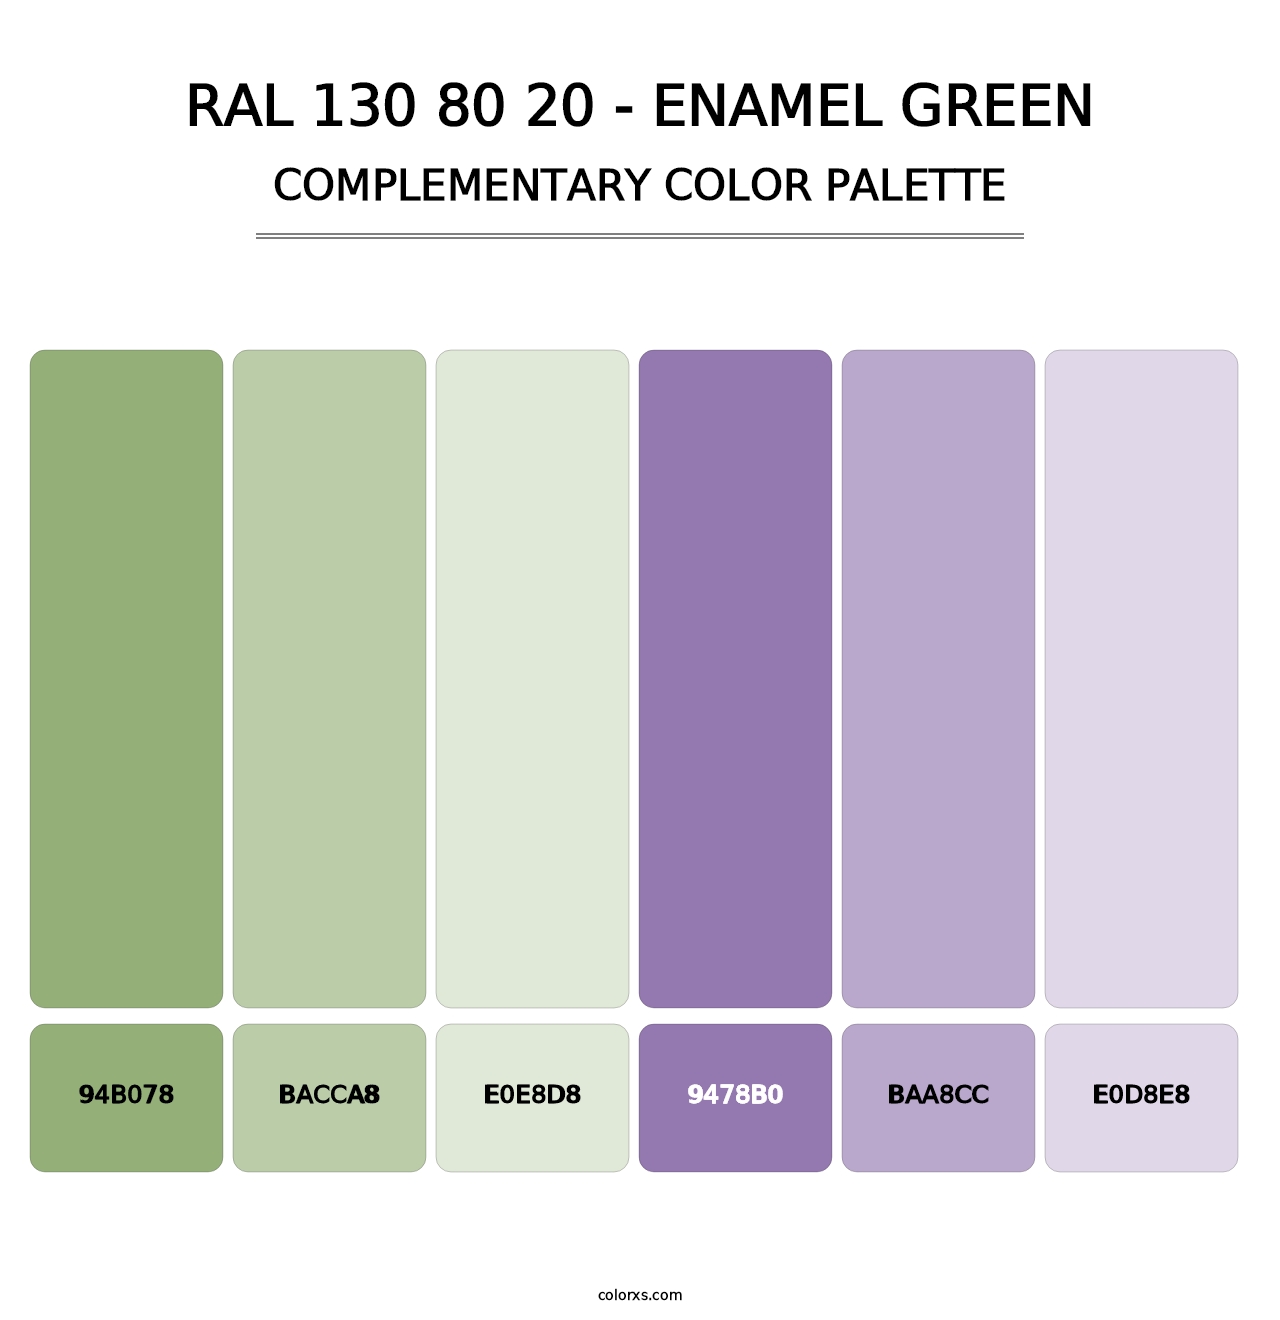 RAL 130 80 20 - Enamel Green - Complementary Color Palette